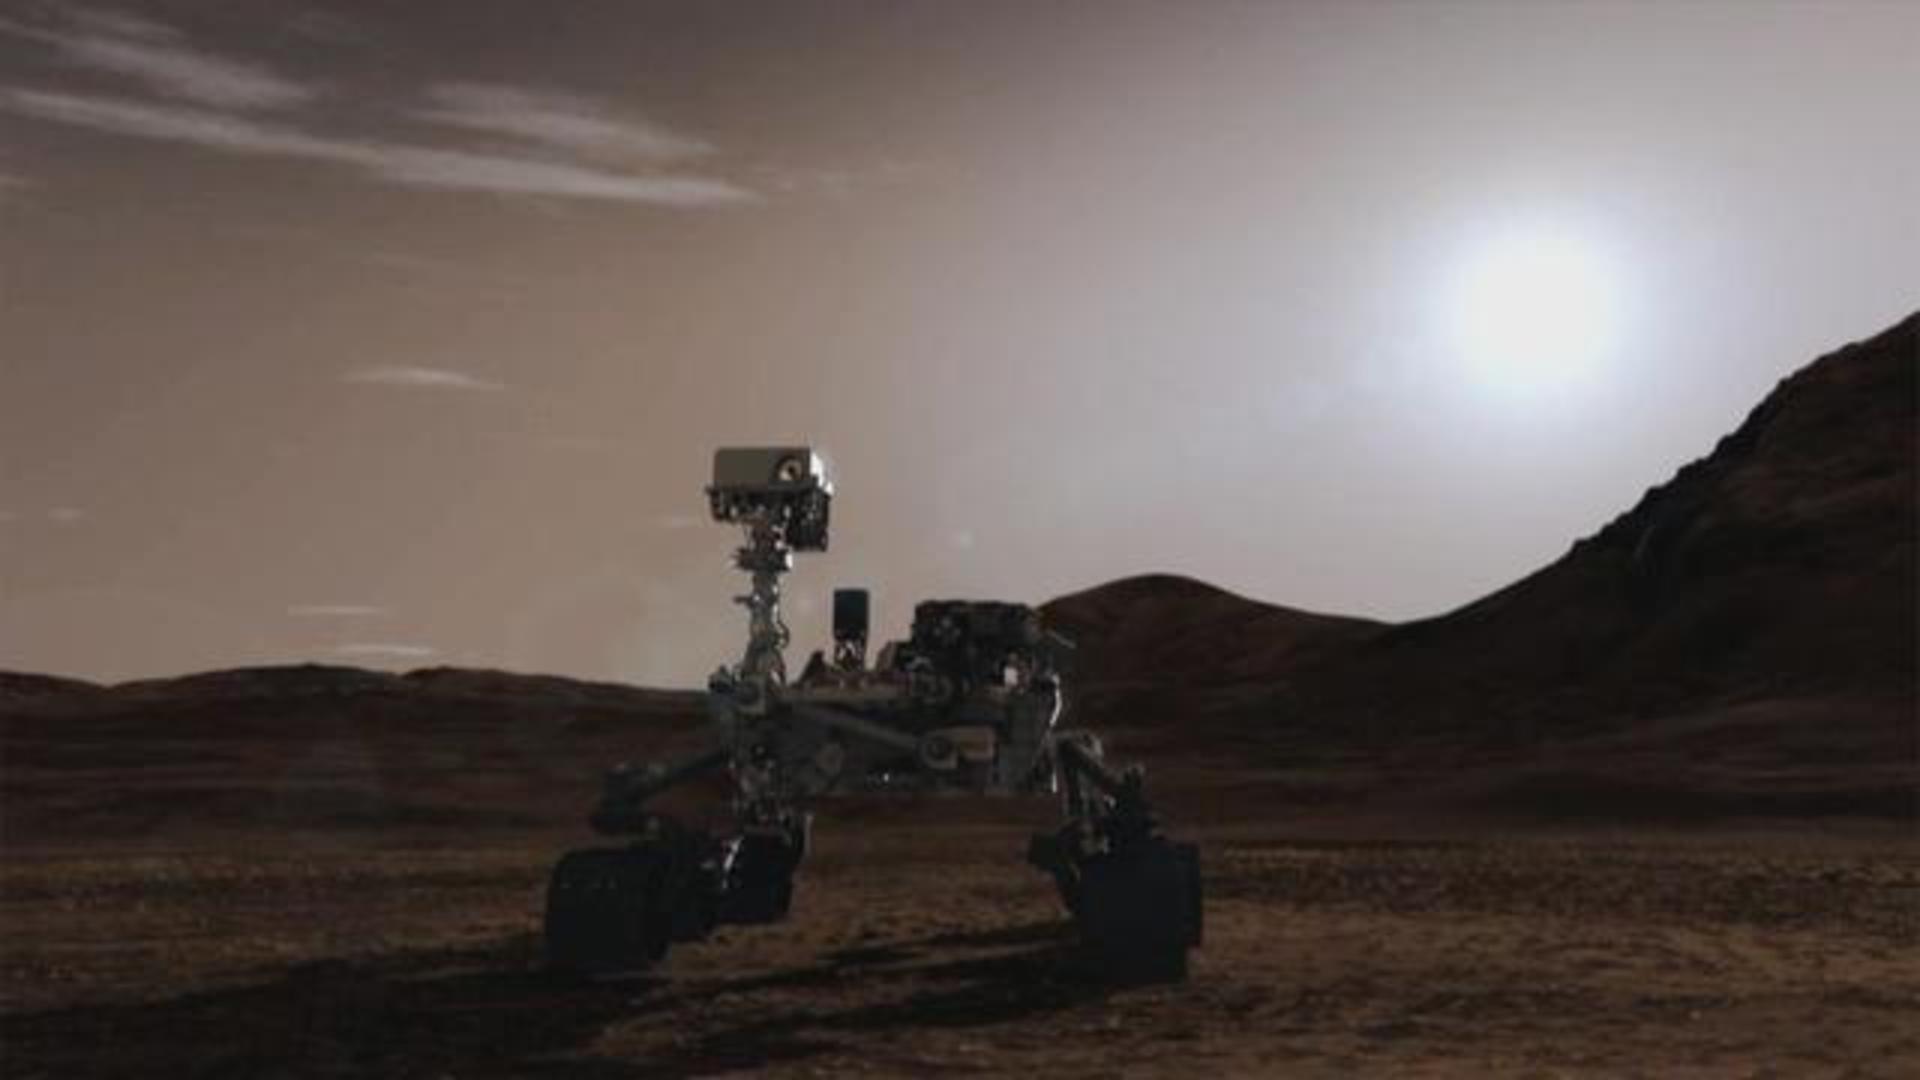 Scientists are building a new Mars rover for $2 billion mission